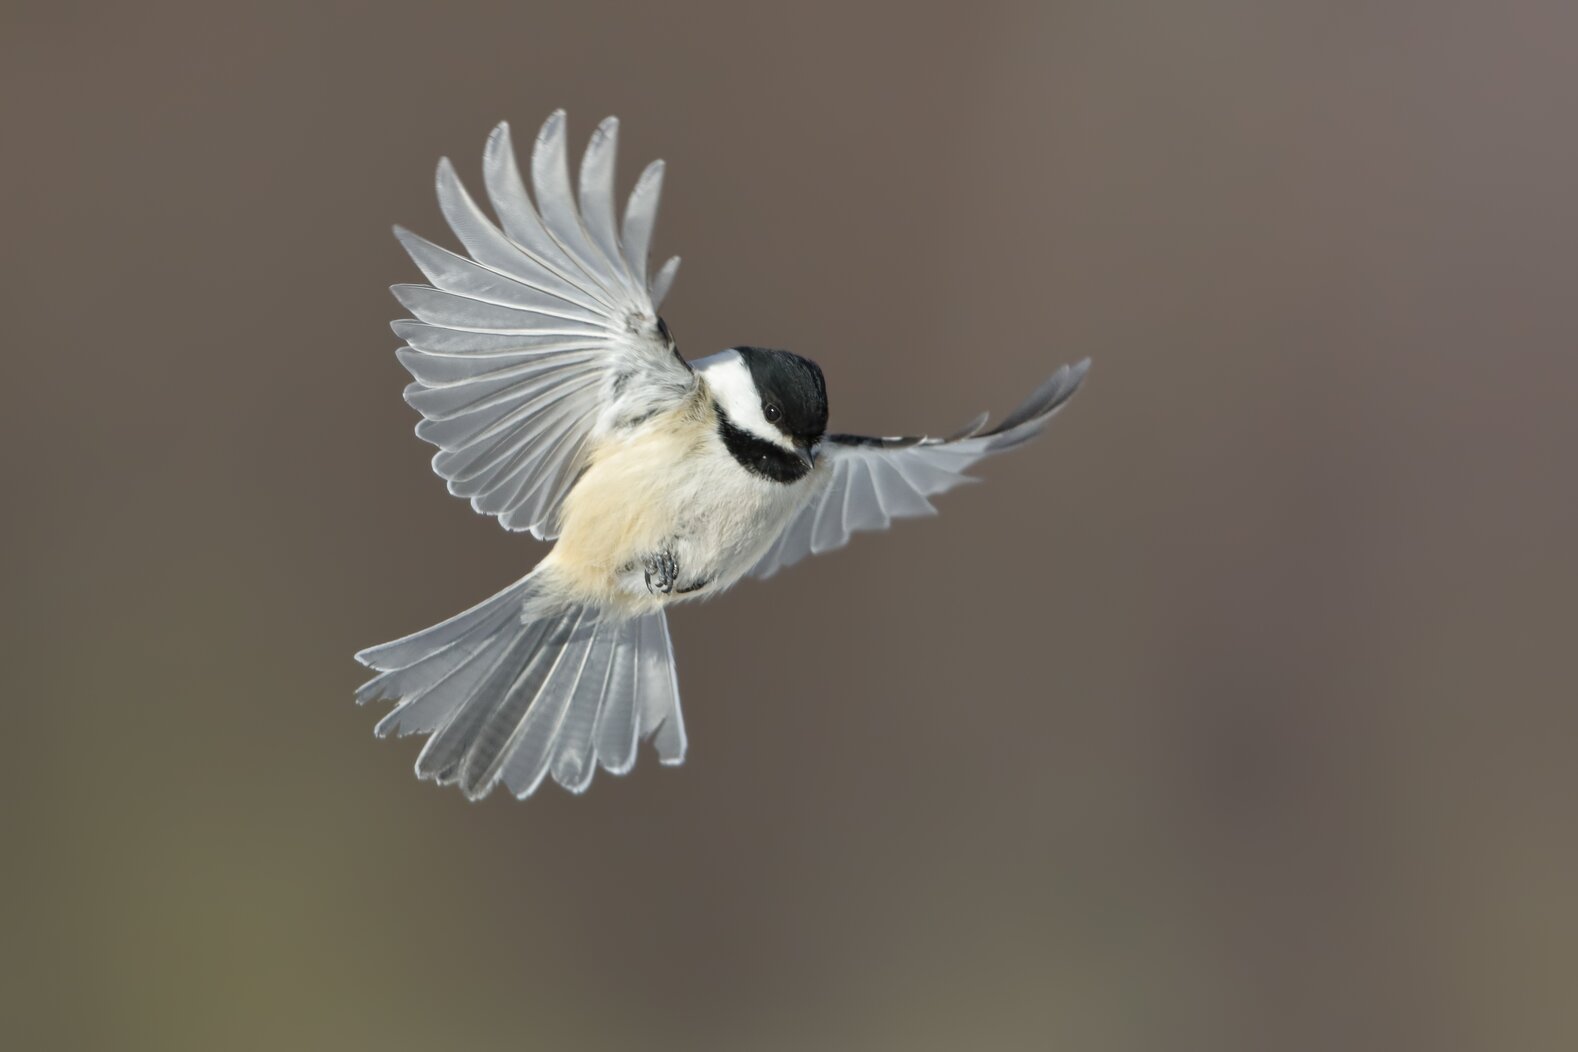 The cavity-nesting Black-capped Chickadee lives year-round in the woodlands of Latourette Park. Photo: Isaac Grant